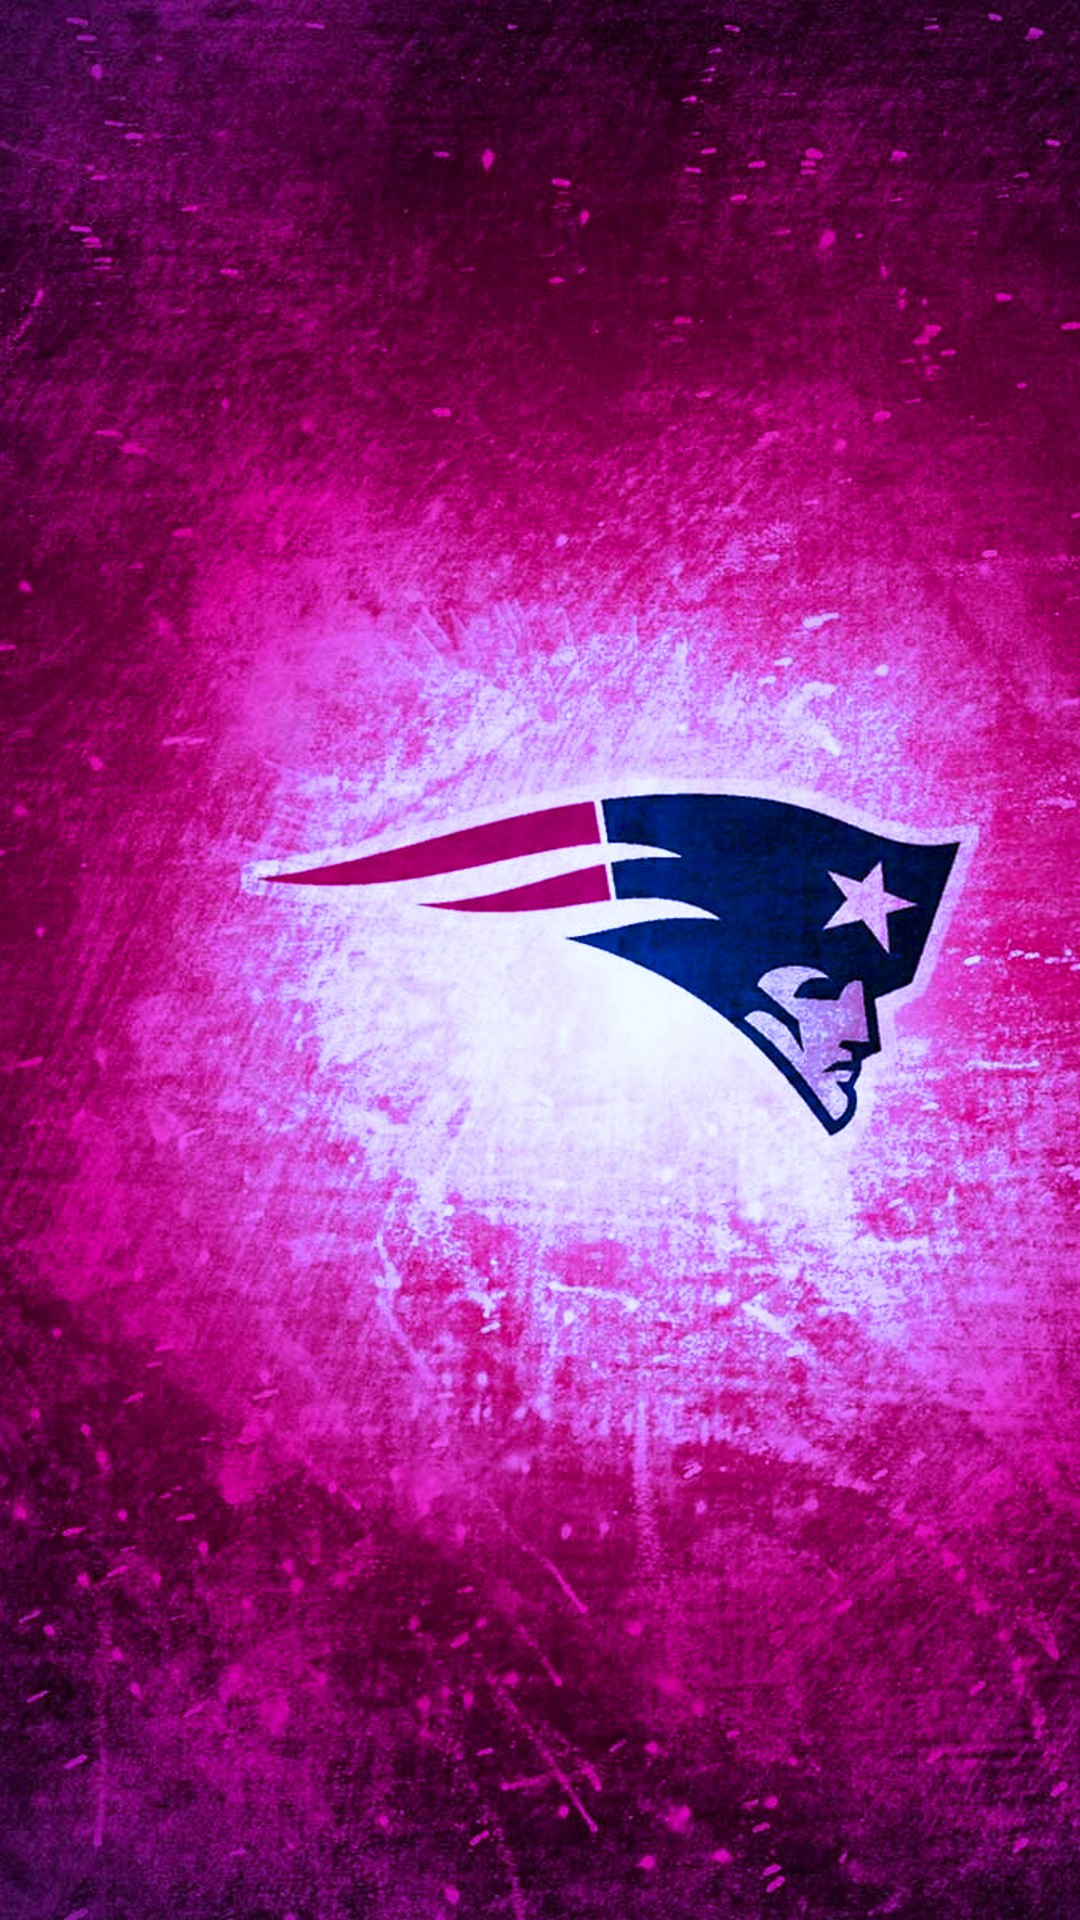 NE Patriots iPhone Wallpaper New With high-resolution 1080X1920 pixel. Donwload and set as wallpaper for your iPhone X, iPhone XS home screen backgrounds, XS Max, XR, iPhone8 lock screen wallpaper, iPhone 7, 6, SE, and other mobile devices